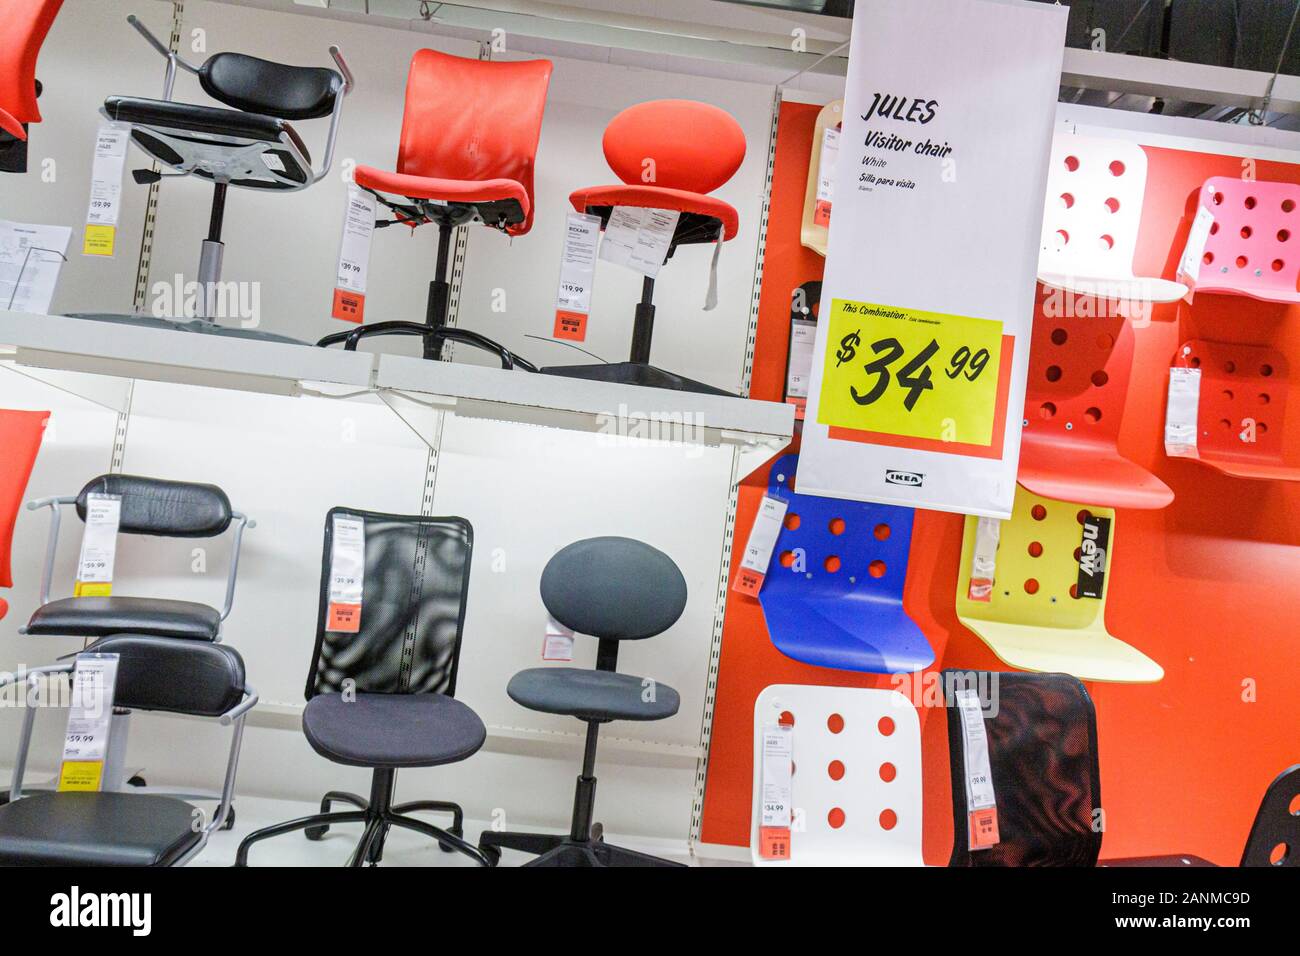 Ikea Office Chairs Stock Photos Ikea Office Chairs Stock Images